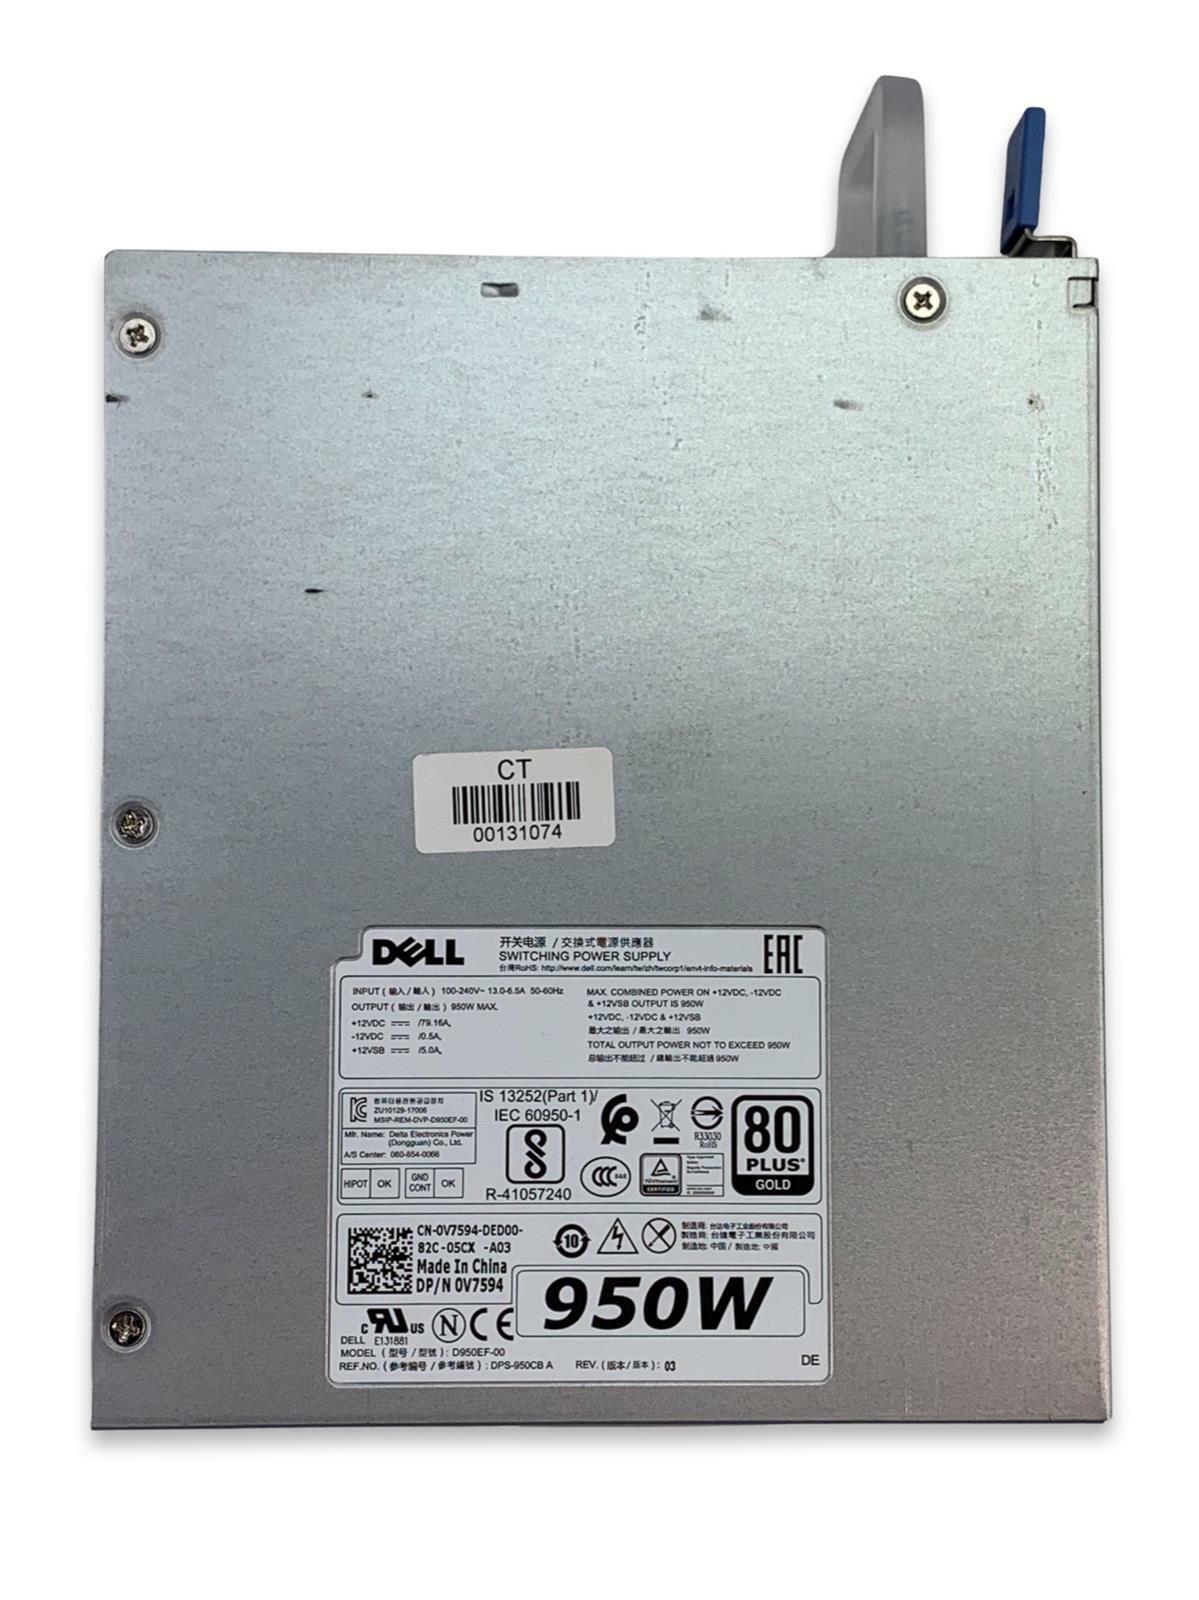 Dell D950EF-00 950W Switching Power Supply MAX 80-Plus Gold for Dell Precision